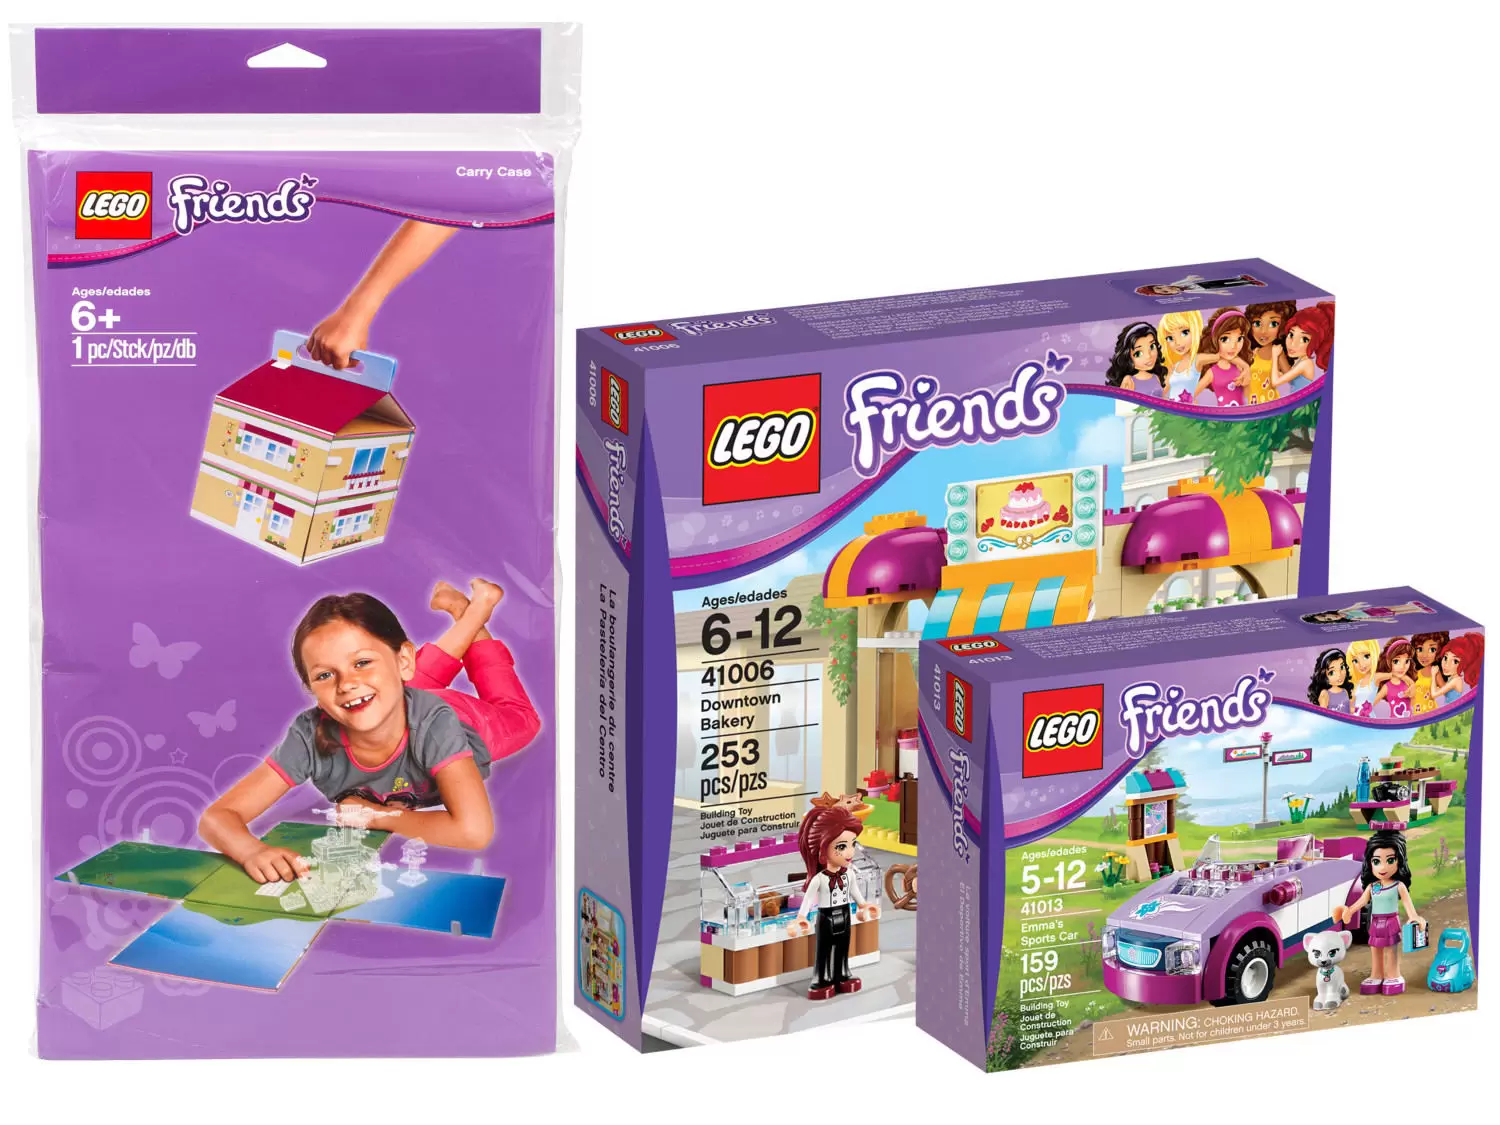 LEGO Friends - Friends Collection 1